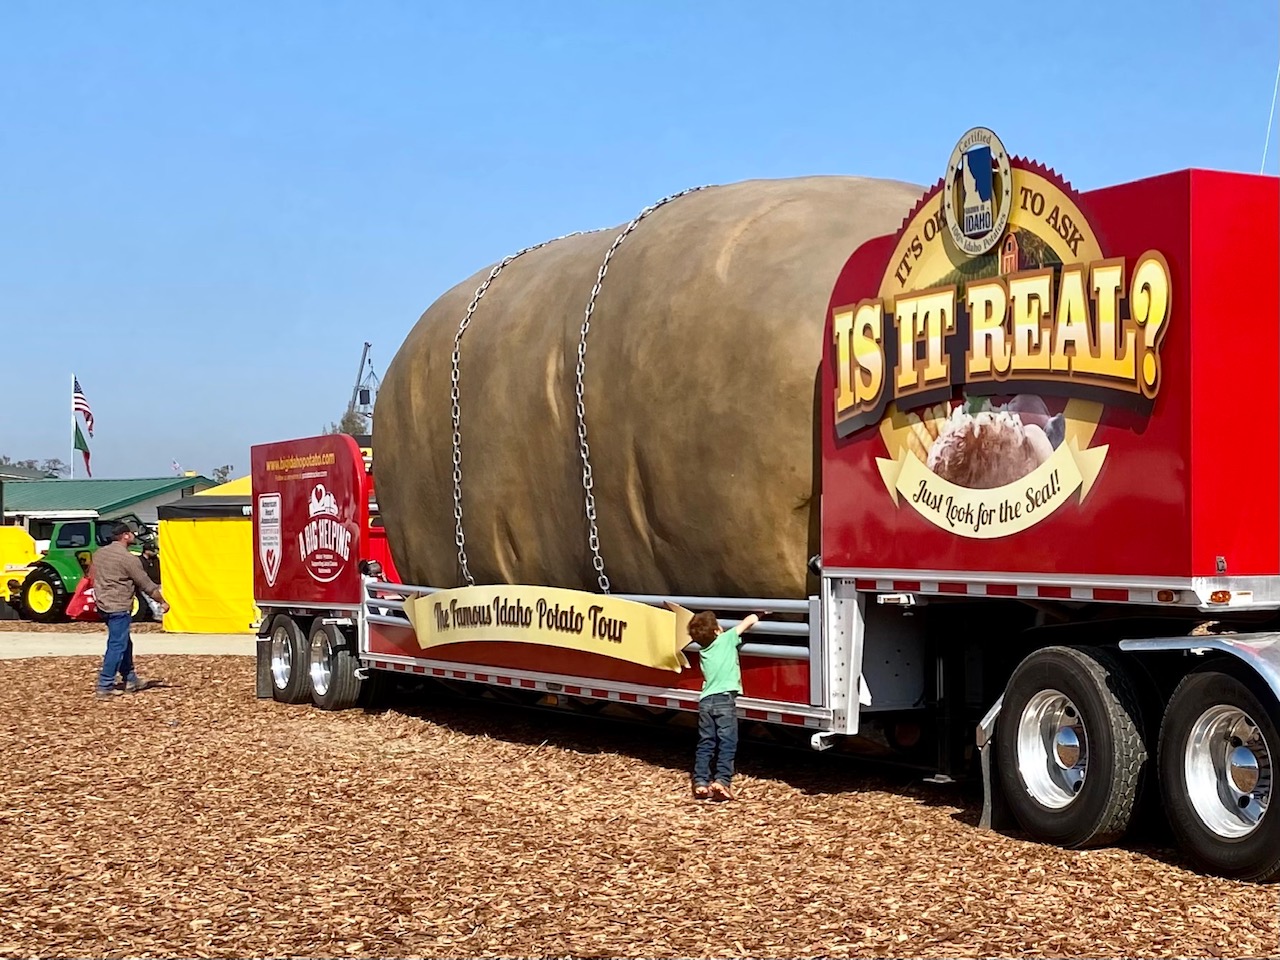  The Famous Idaho Potato made the drive to Tulare, Calif. for the expo. The potato was a kid magnet. 